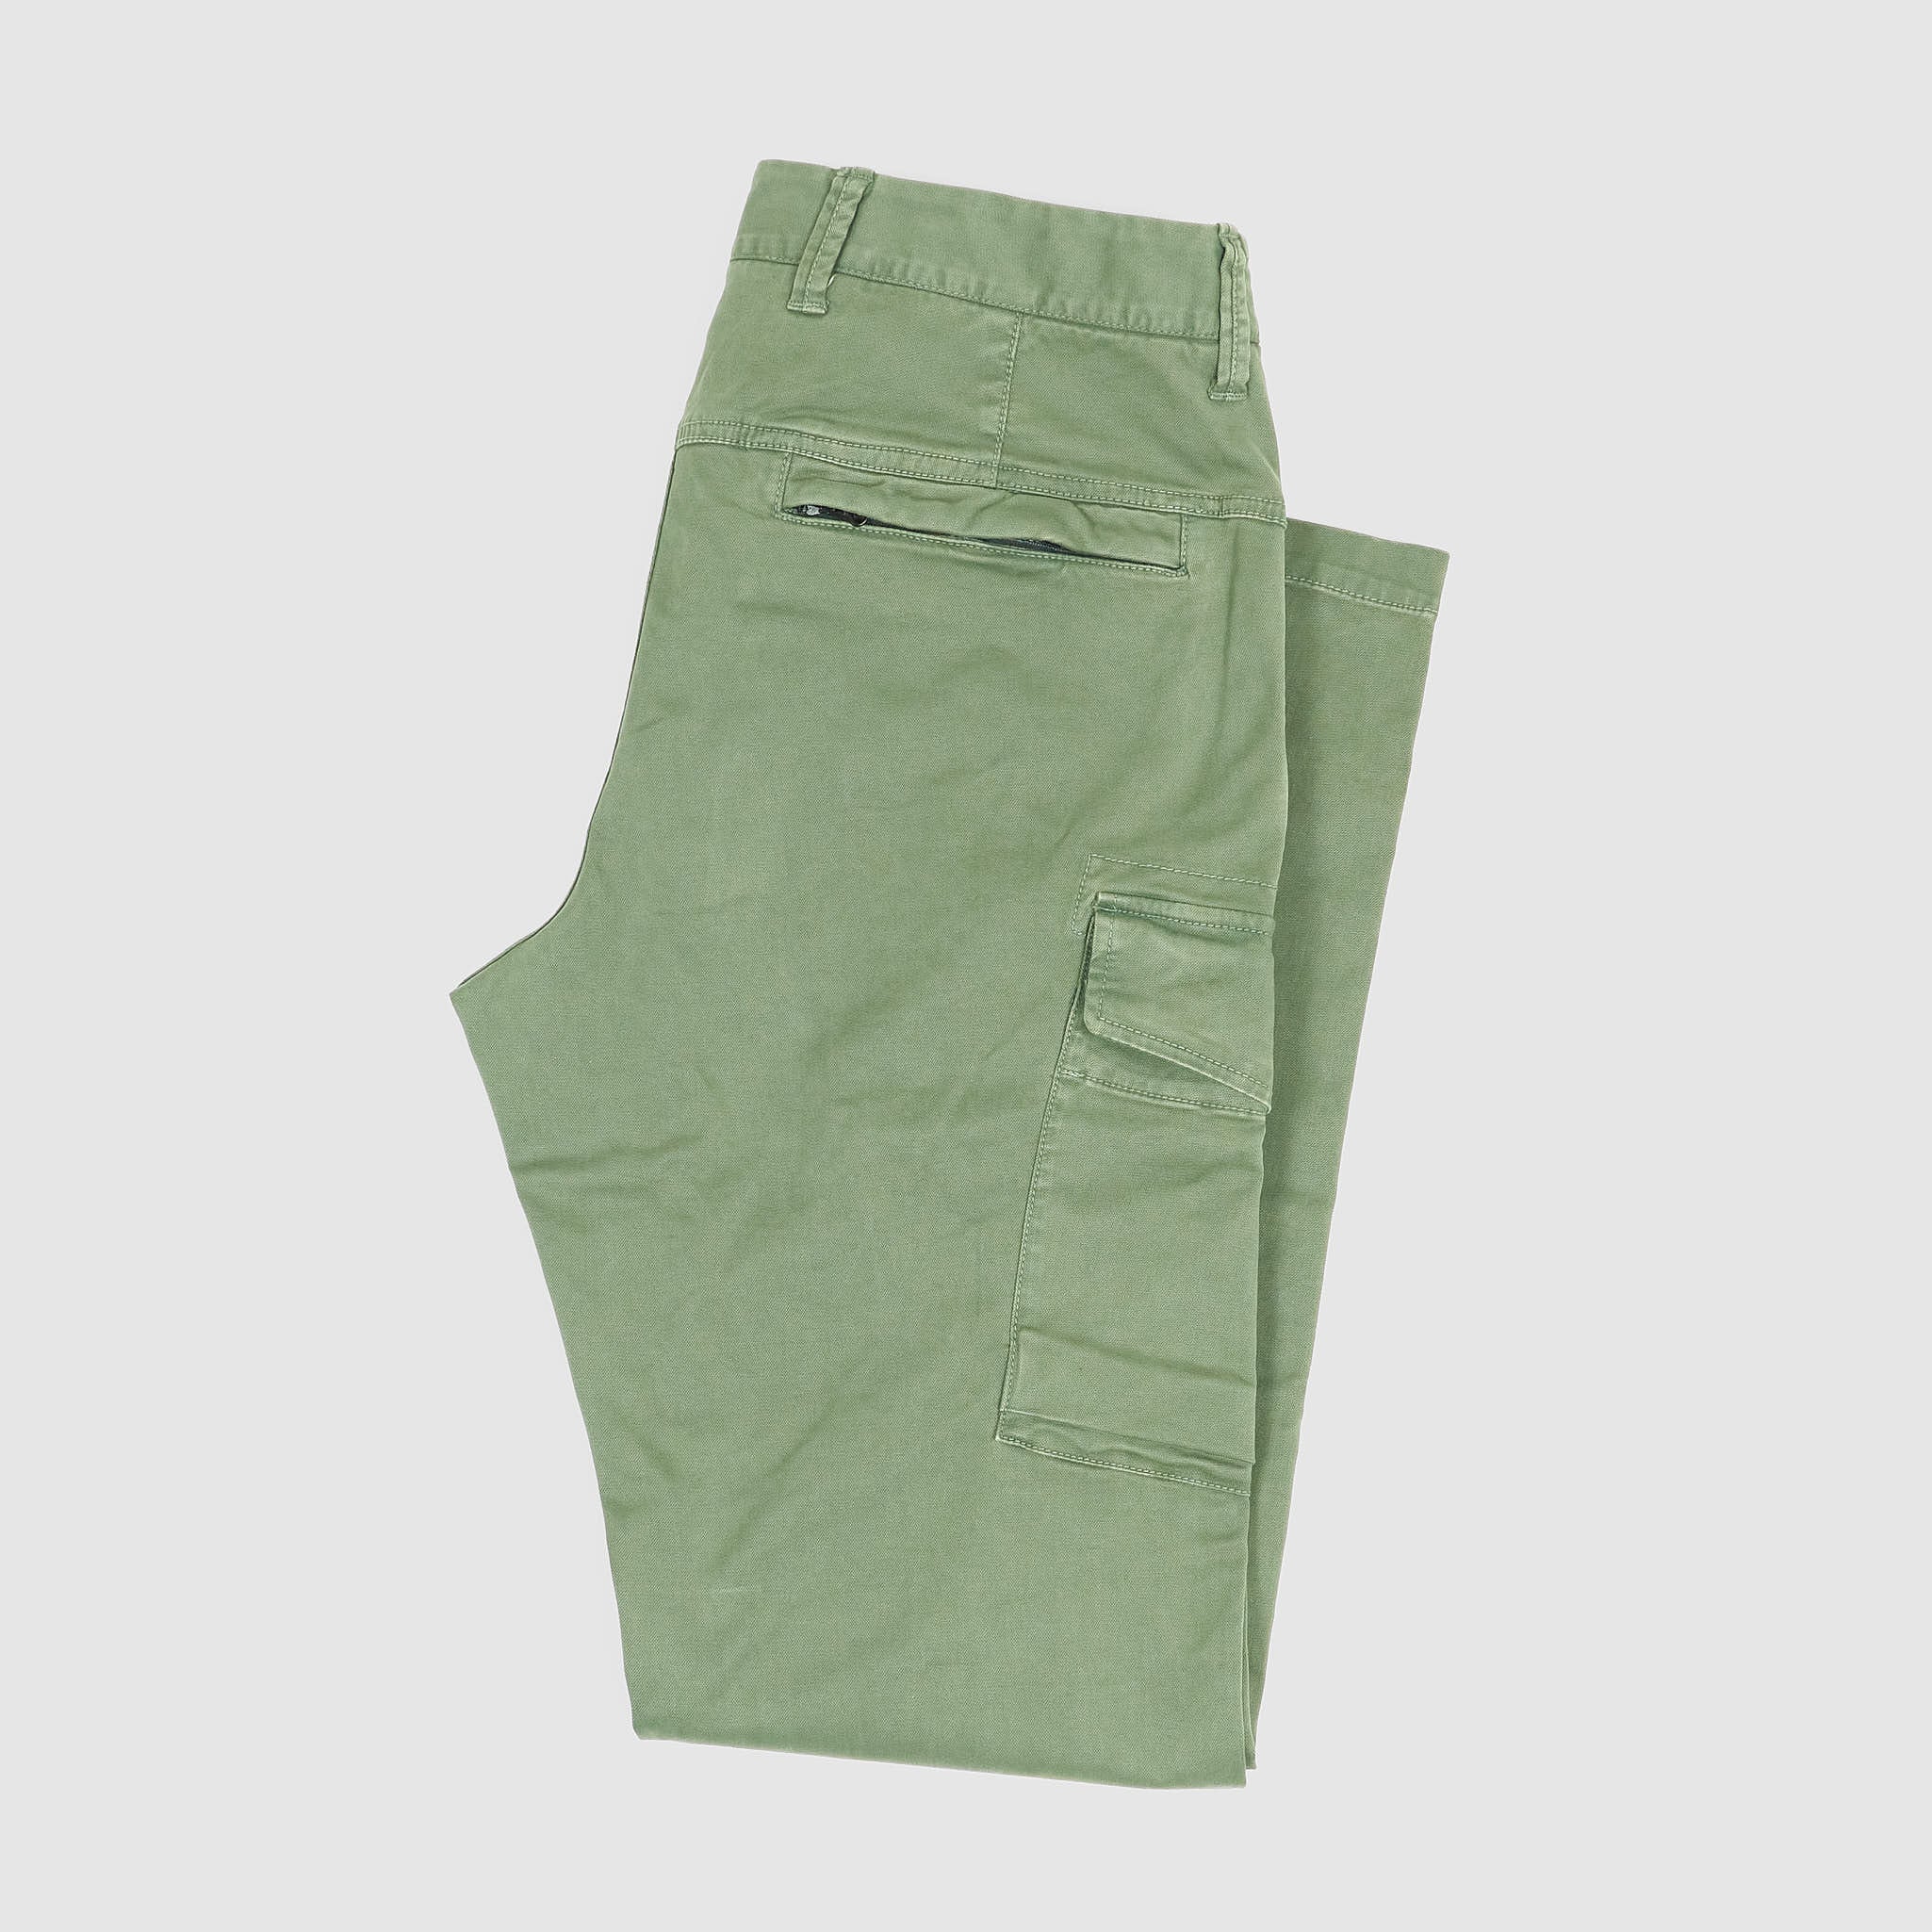 Stone island old effect cargo pants W30 - ワークパンツ